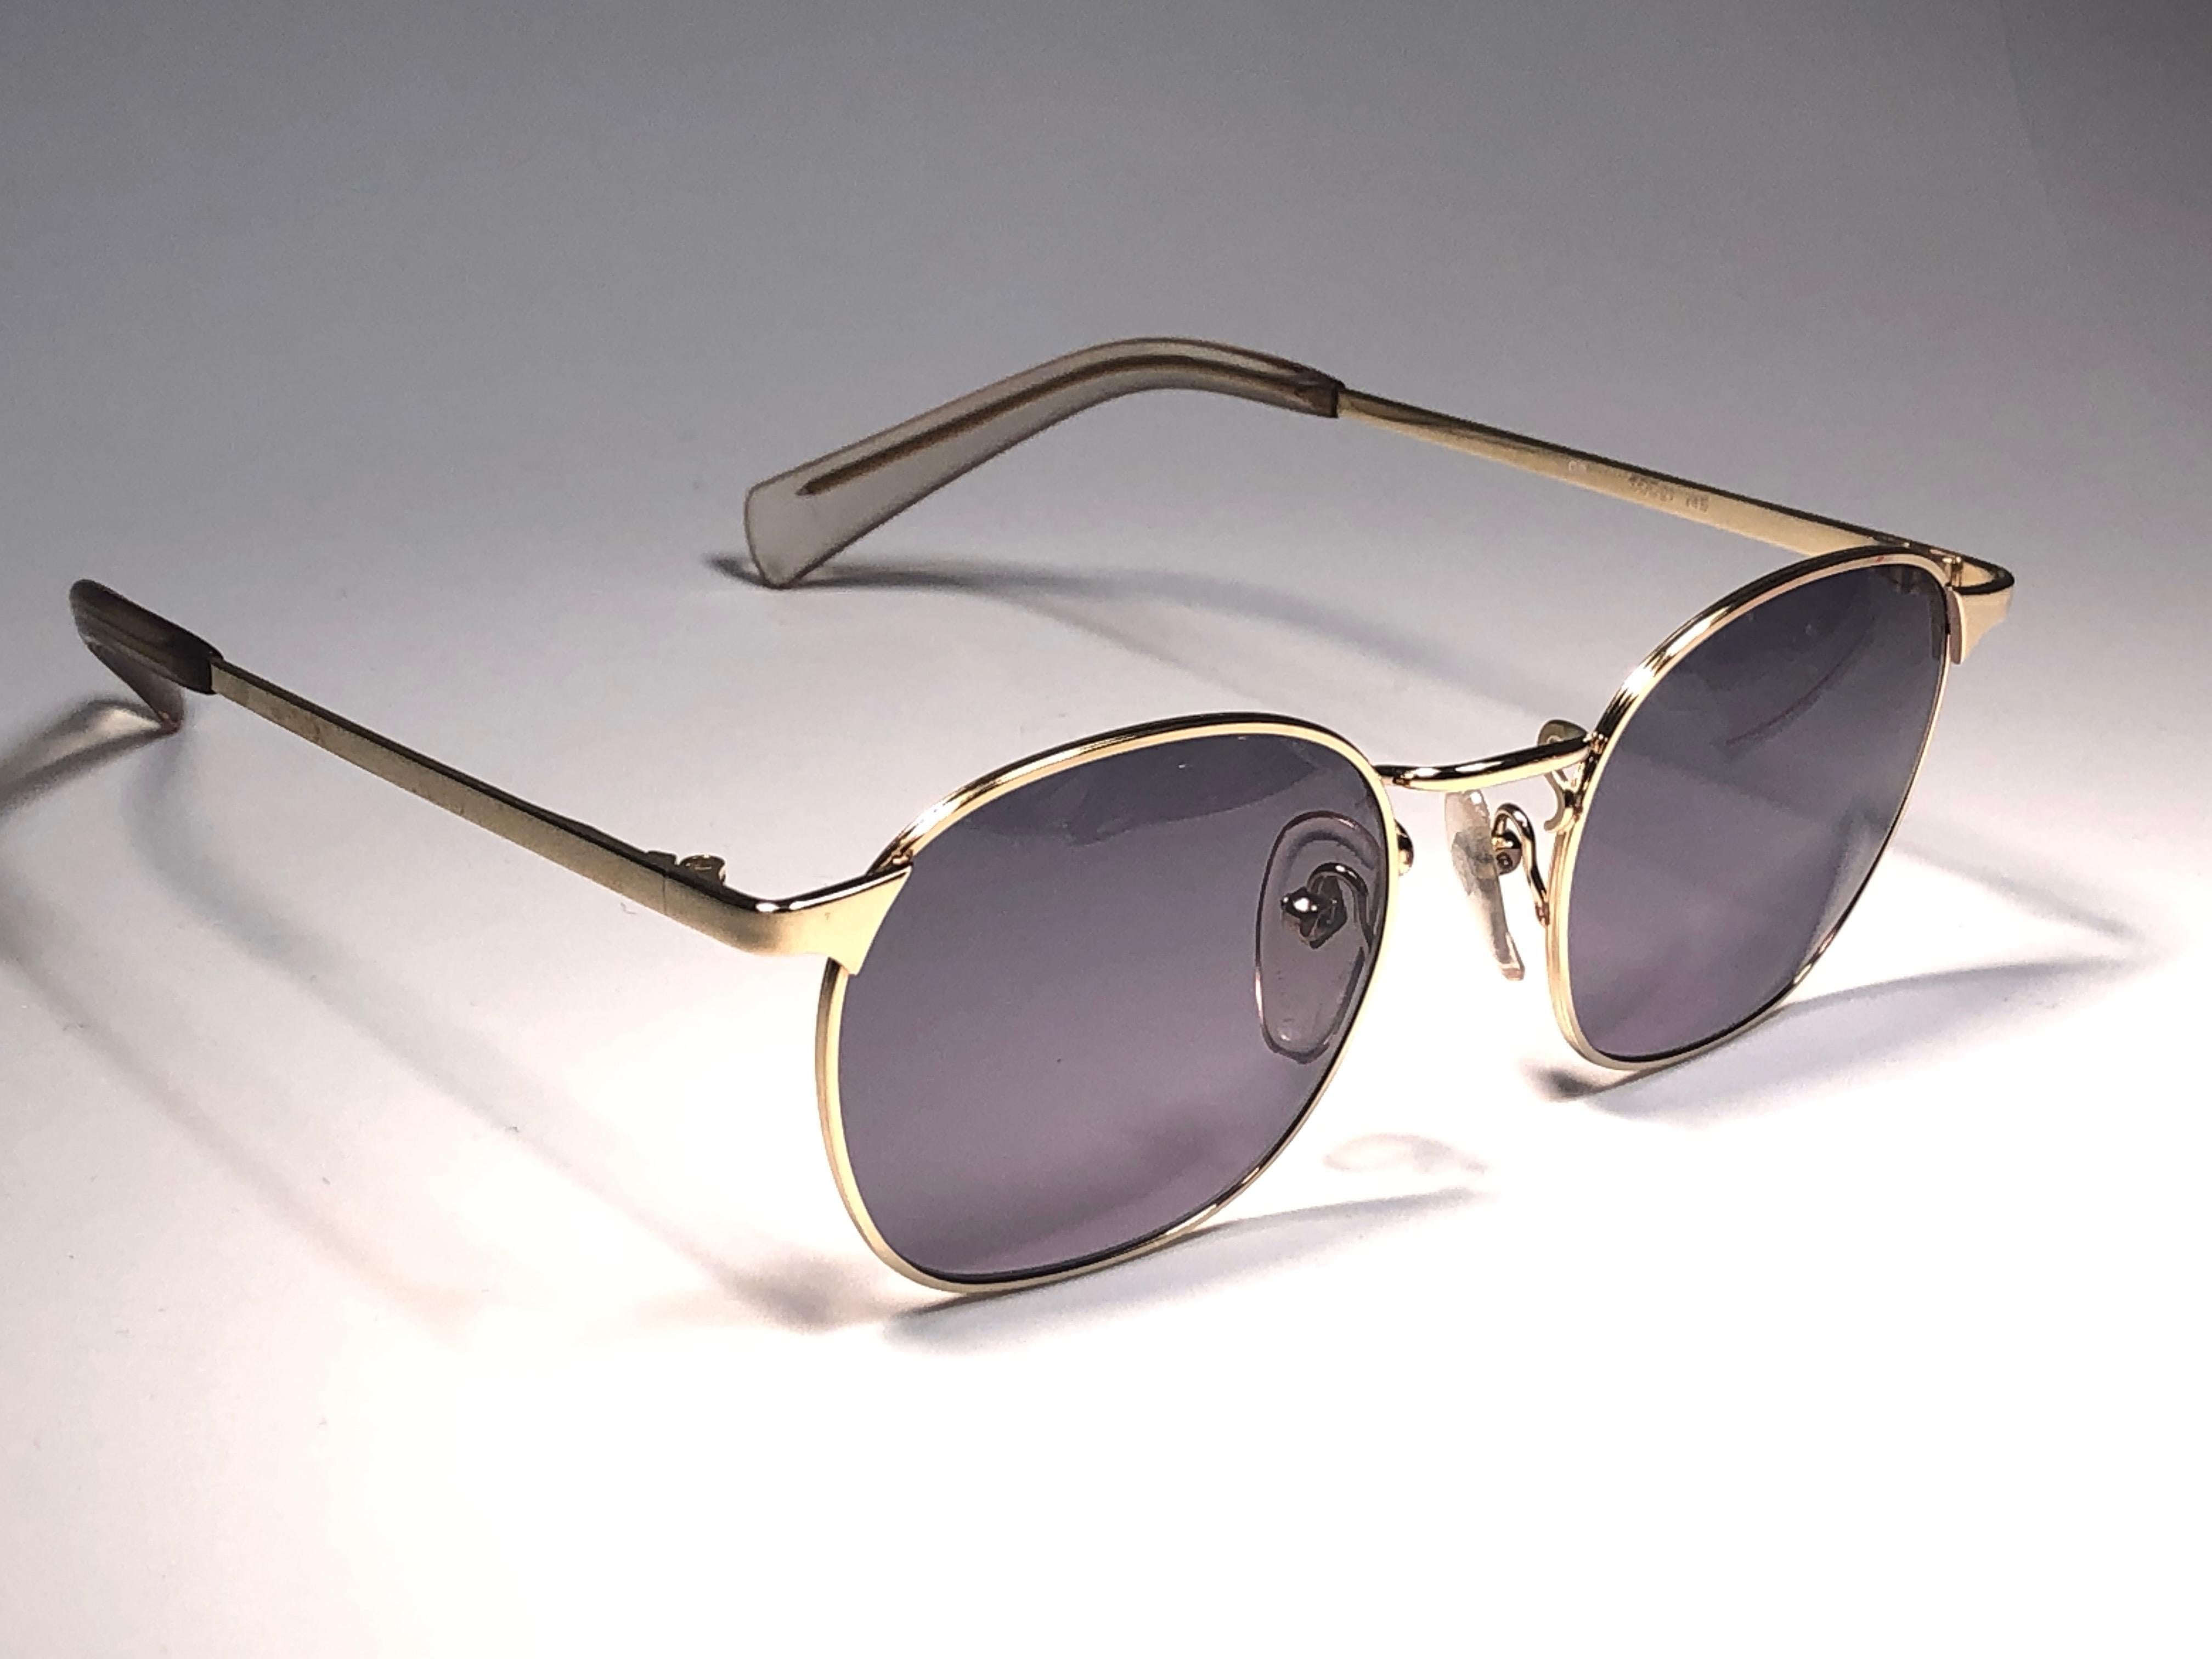 New Jean Paul Gaultier medium gold frame. 
Spotless grey lenses that complete a ready to wear JPG look.

Amazing design with strong yet intricate details.
Design and produced in the 1990's.
New, never worn or displayed.
This item may show minor sign